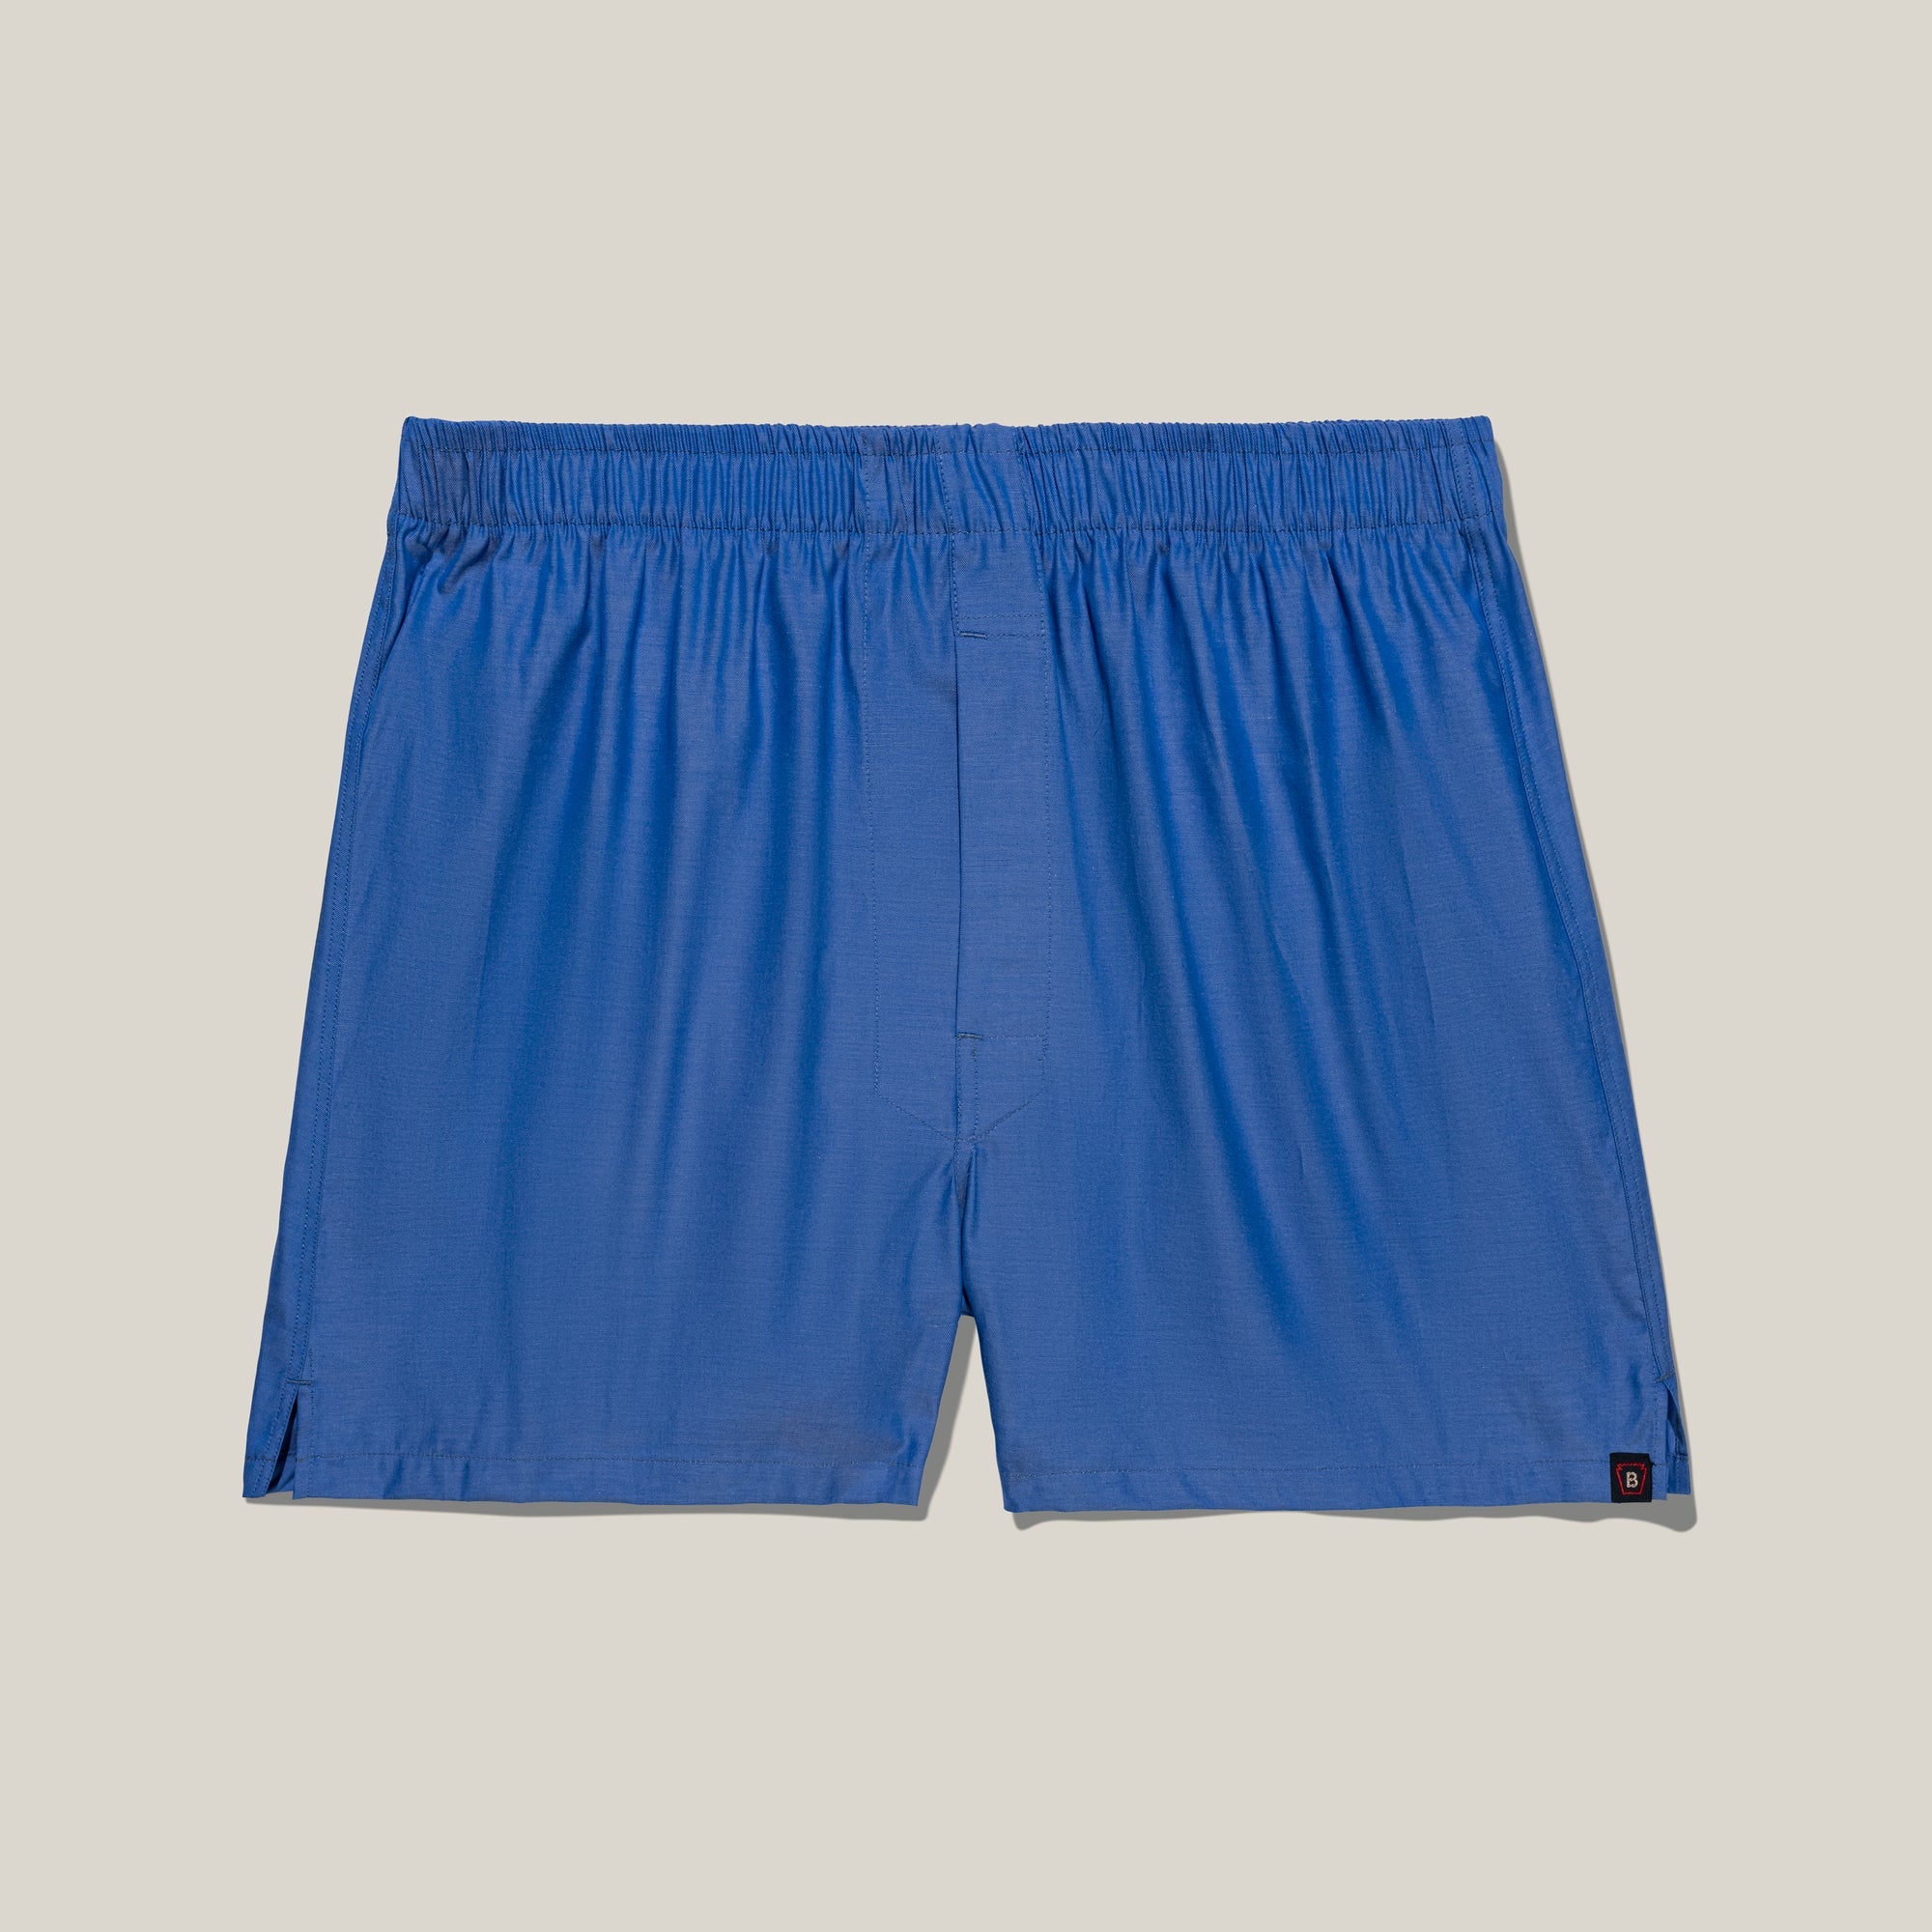 Classic Cotton Boxer in French Blue by Bills Khakis